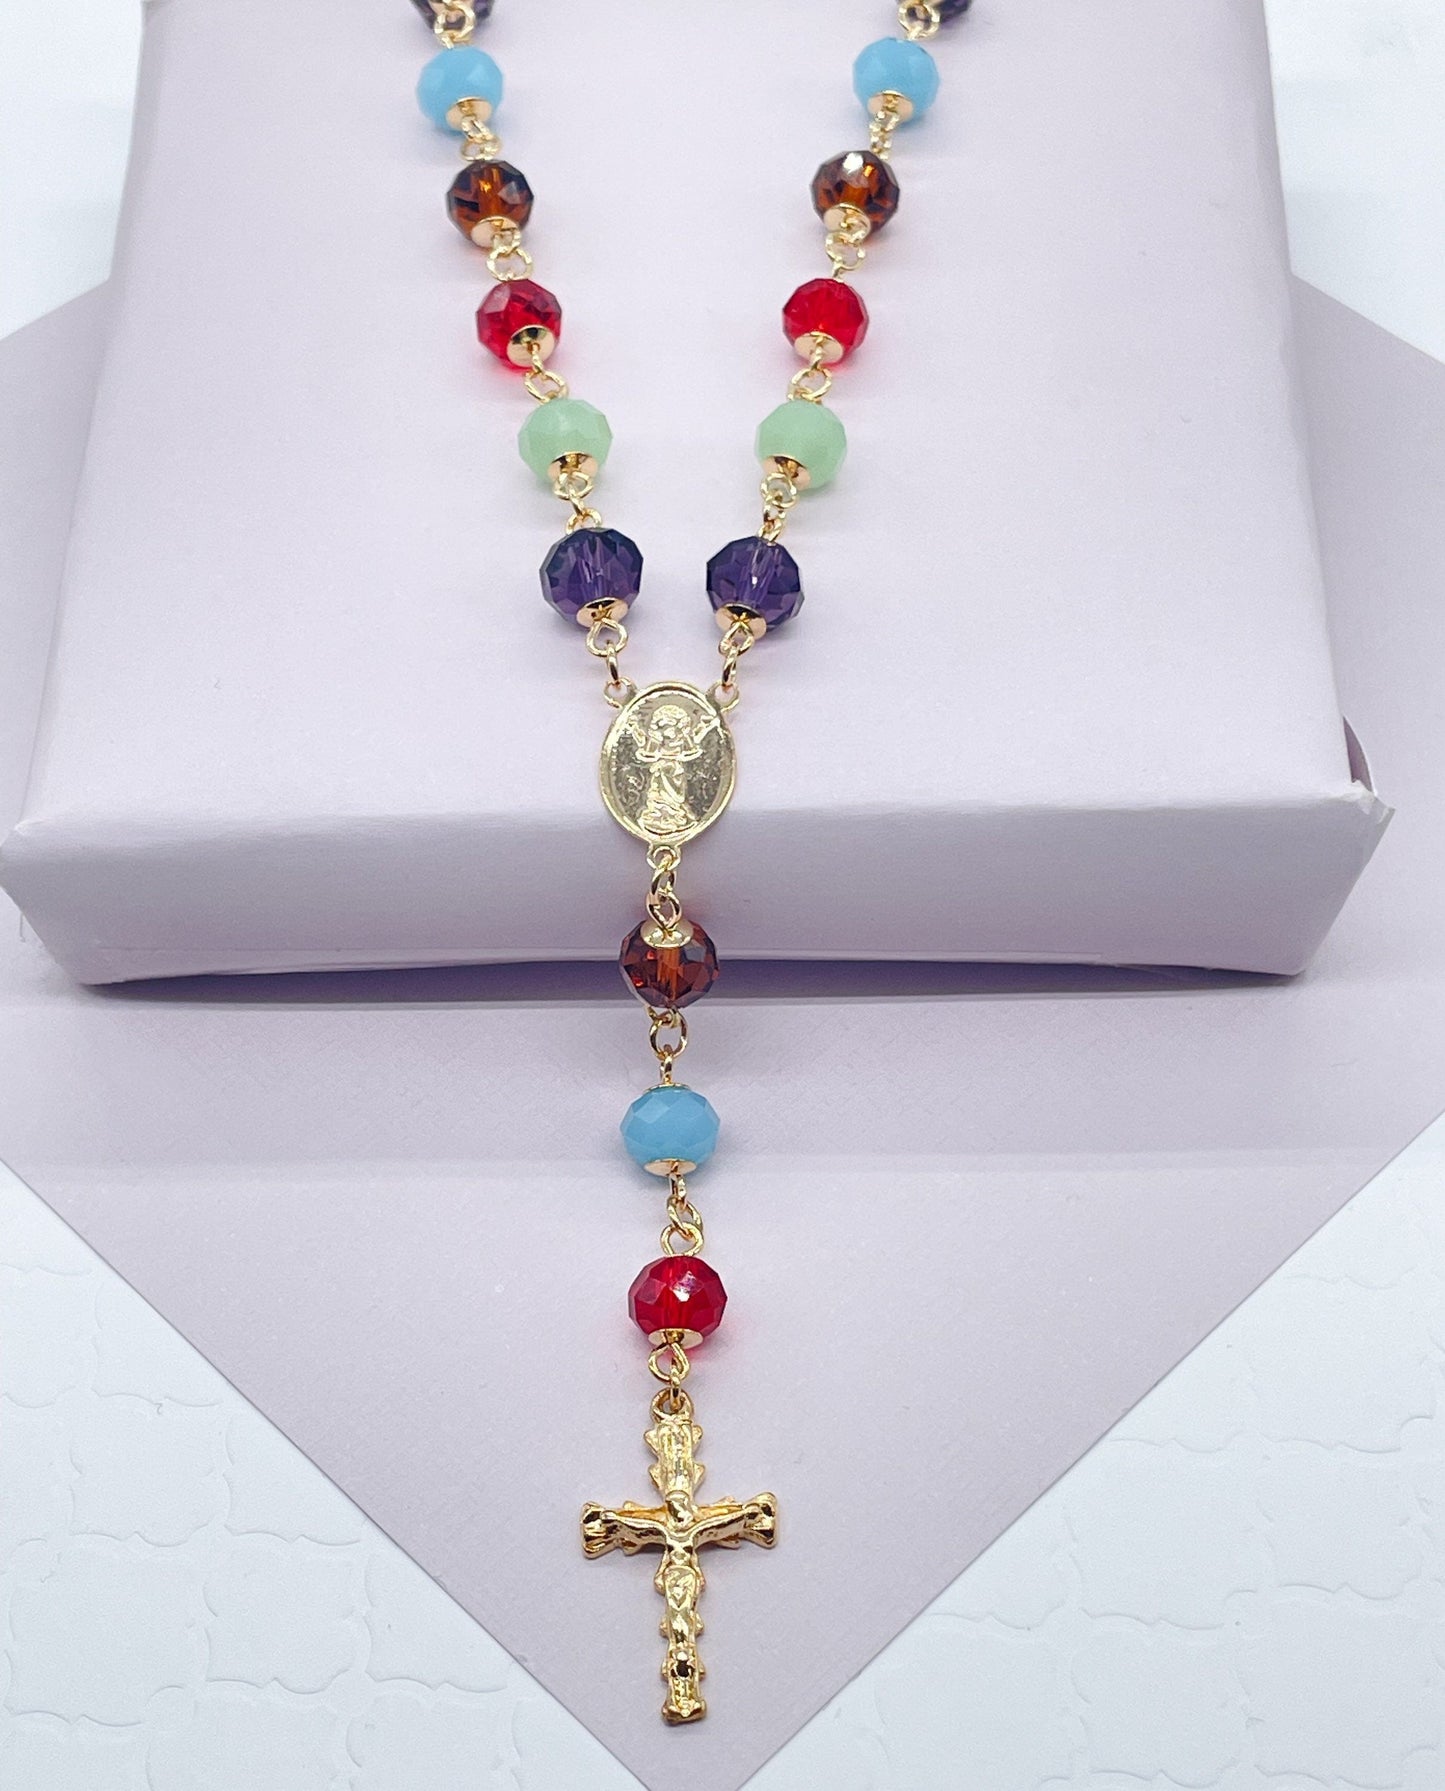 18k Gold Layered Colorful Glass Ball Rosary Necklace with Baby Jesus and Cross,